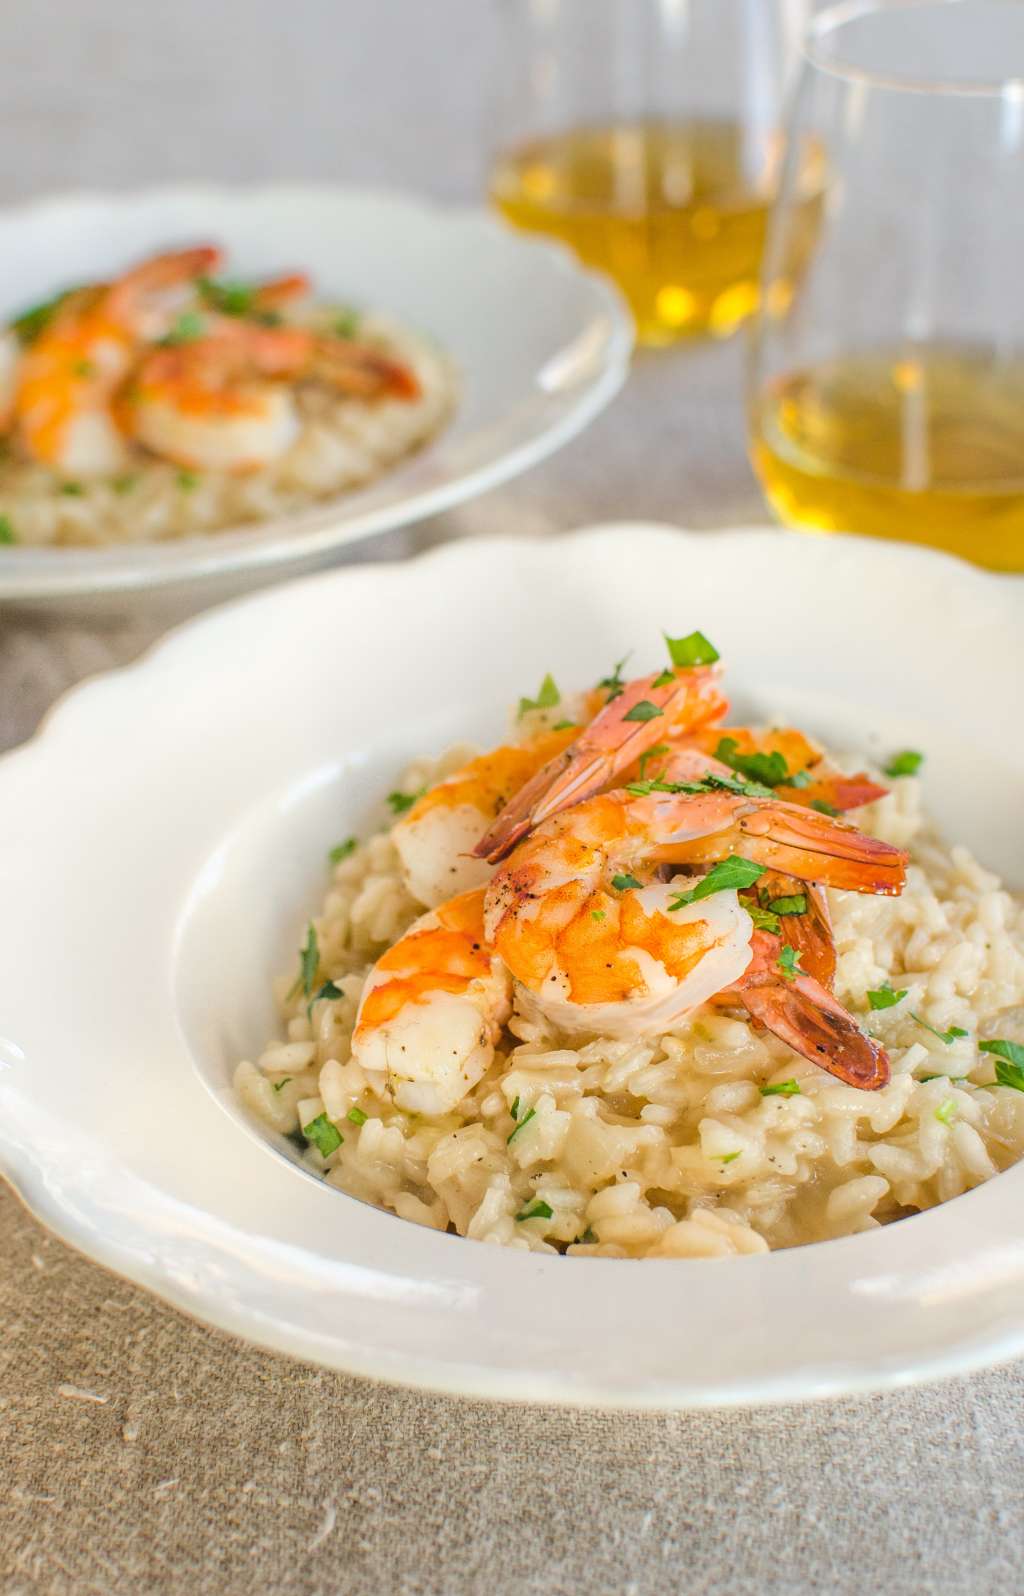 Parmesan Risotto with Roasted Shrimp, Mini Cheesecakes, Chili-Rubbed ...